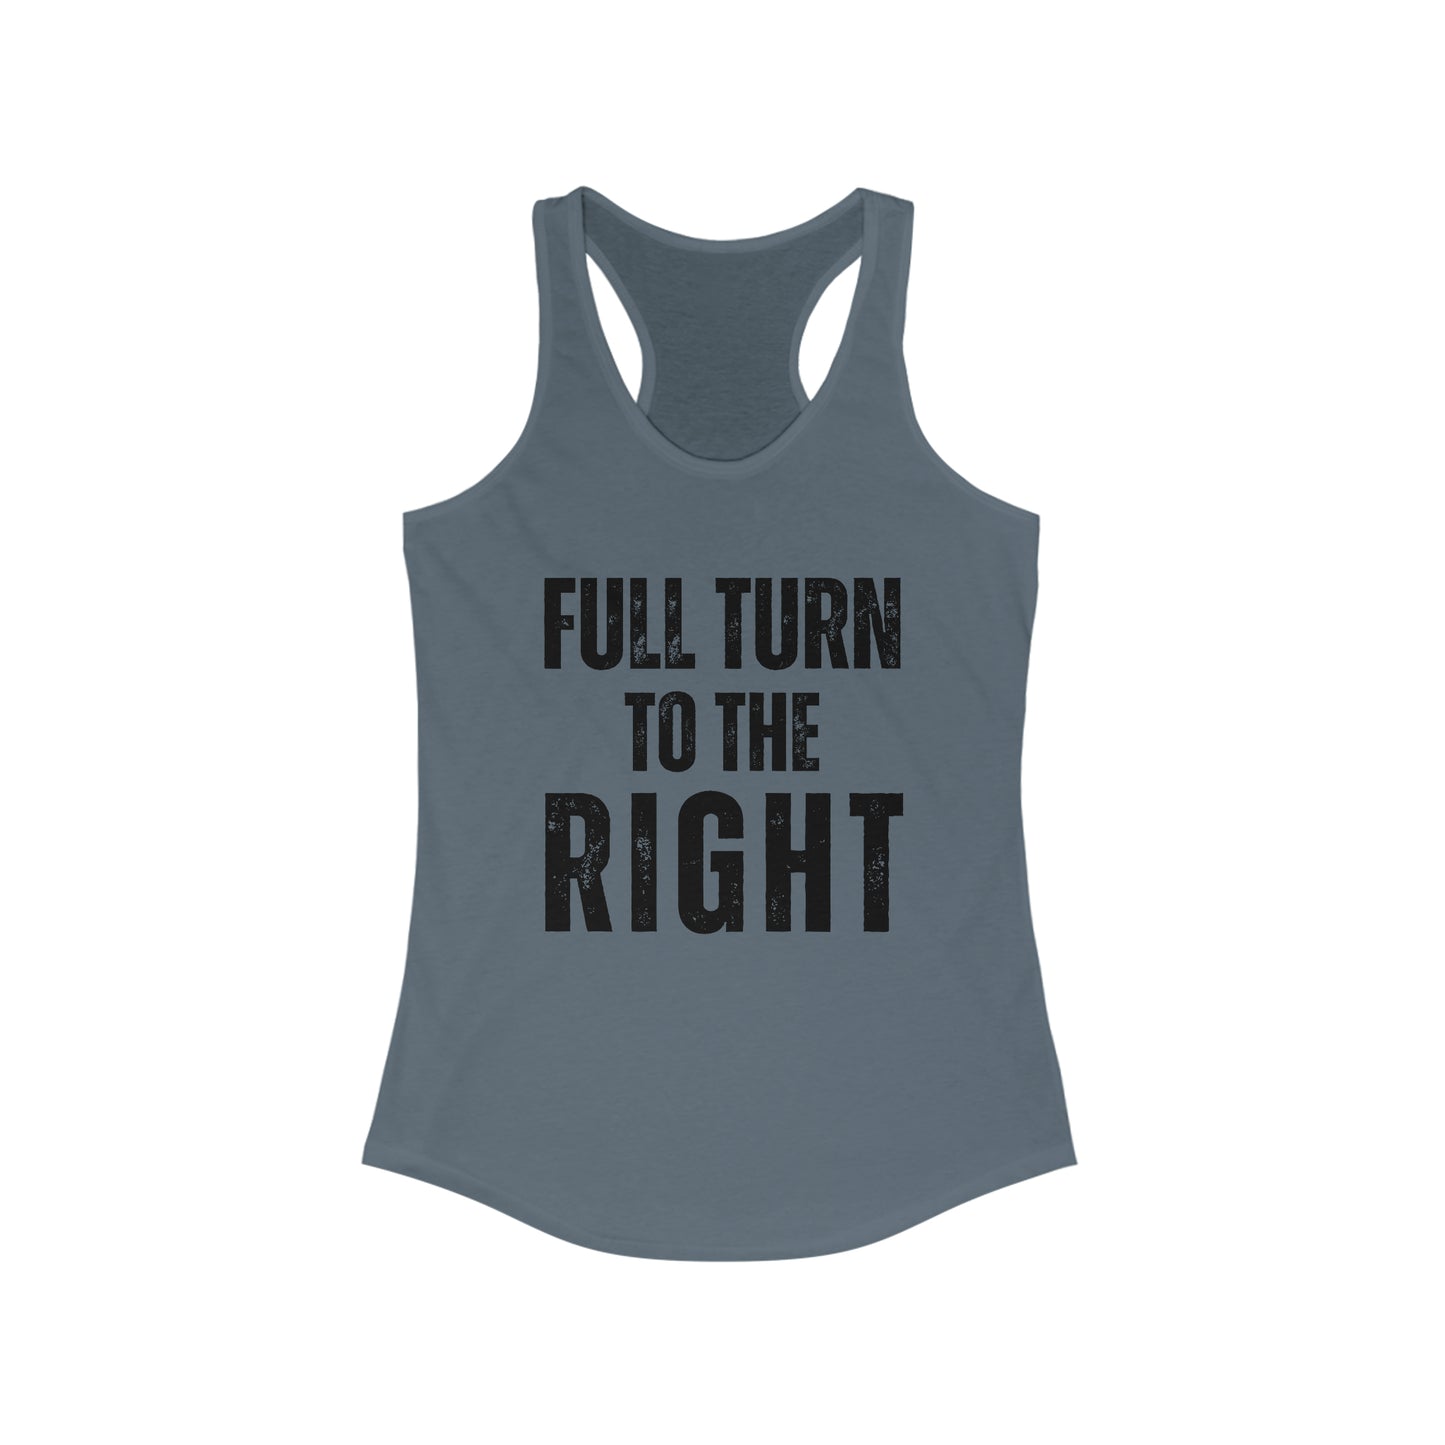 Full Turn to the Right - Spin class tank top